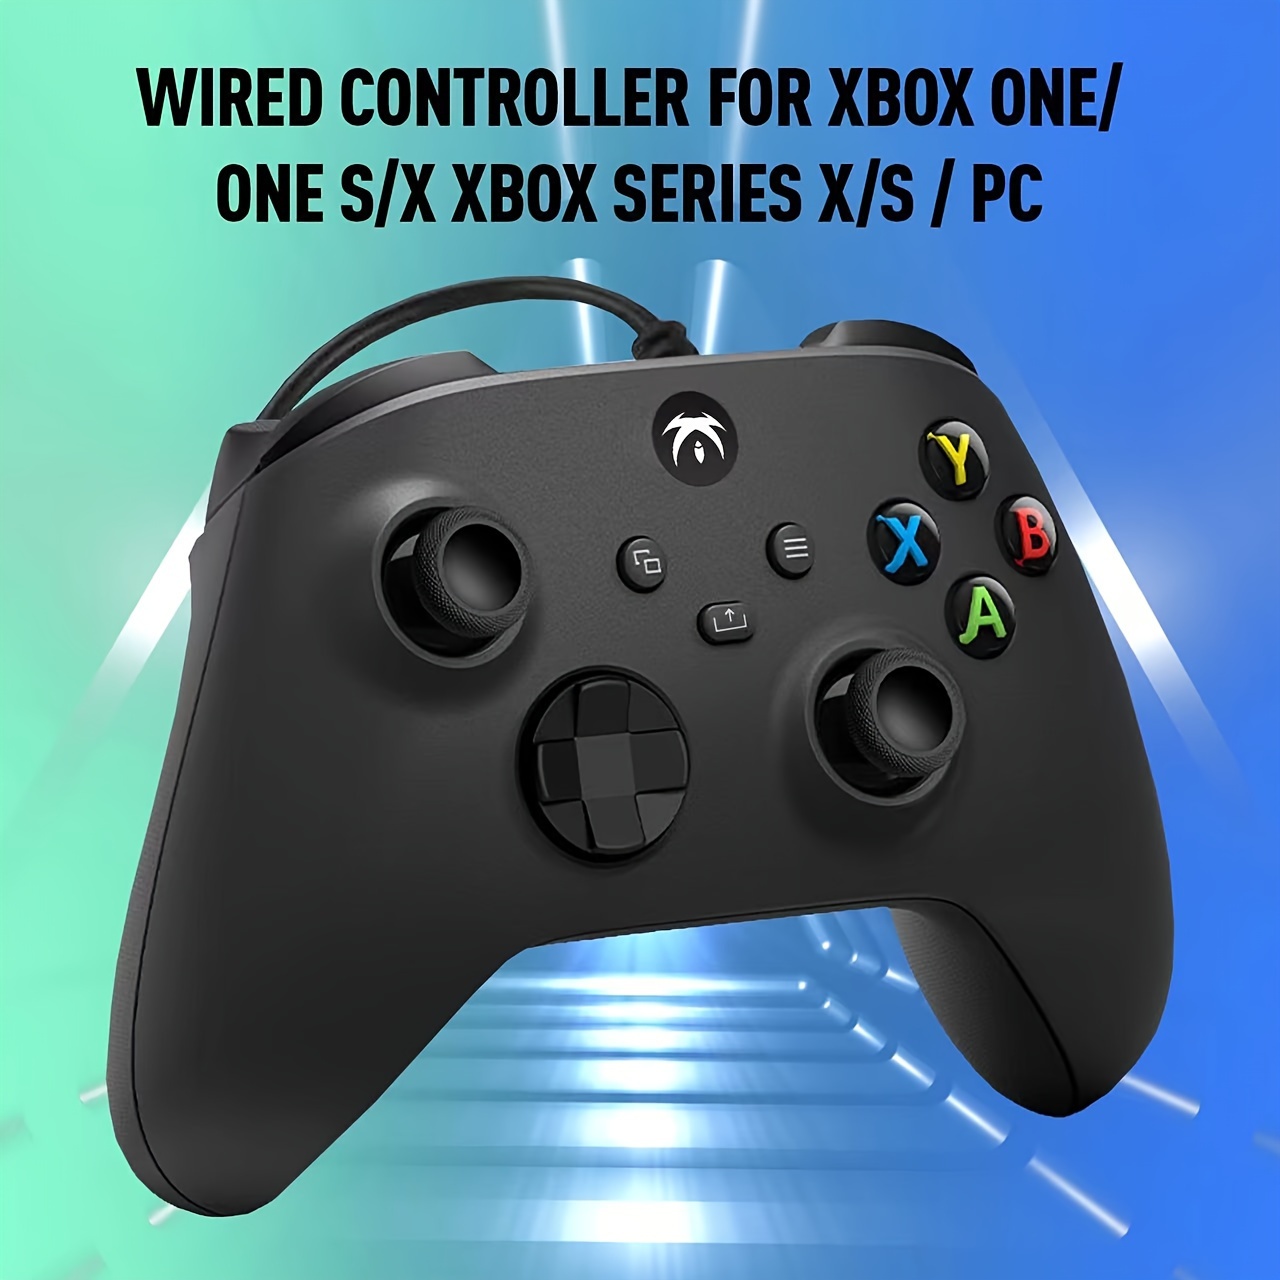 GameSir G7 SE Wired Gaming Controller for Xbox Series XS, Xbox One,  Windows 10/11, PC Controller Gamepad with Hall Effect Sticks and 3.5mm  Audio Jack 